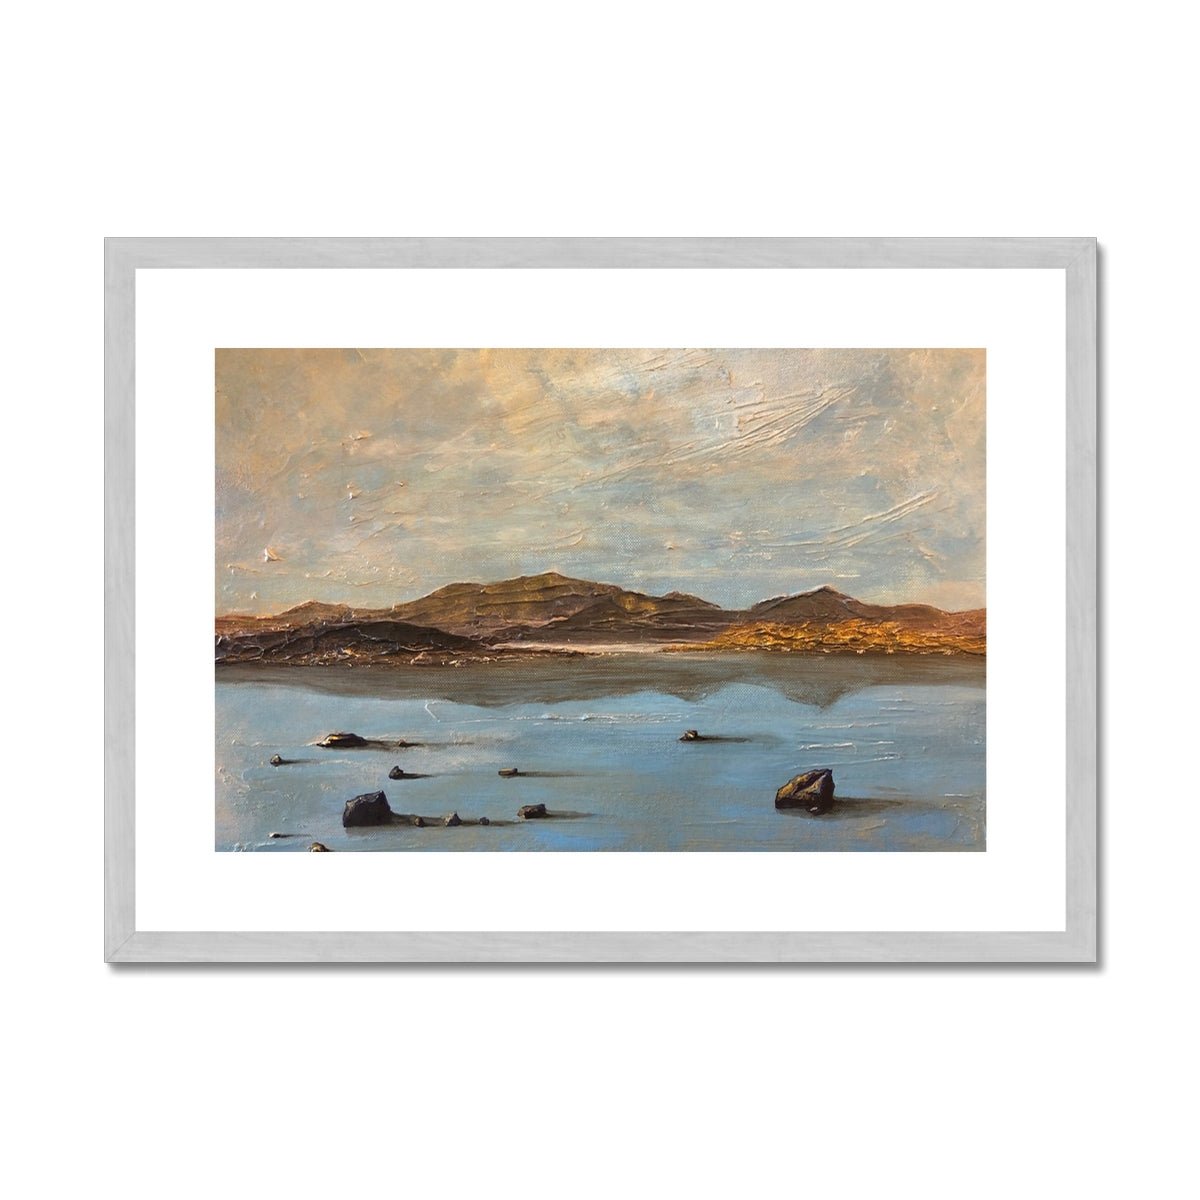 Loch Druidibeg South Uist Painting | Antique Framed & Mounted Prints From Scotland-Antique Framed & Mounted Prints-Scottish Lochs Art Gallery-A2 Landscape-Silver Frame-Paintings, Prints, Homeware, Art Gifts From Scotland By Scottish Artist Kevin Hunter